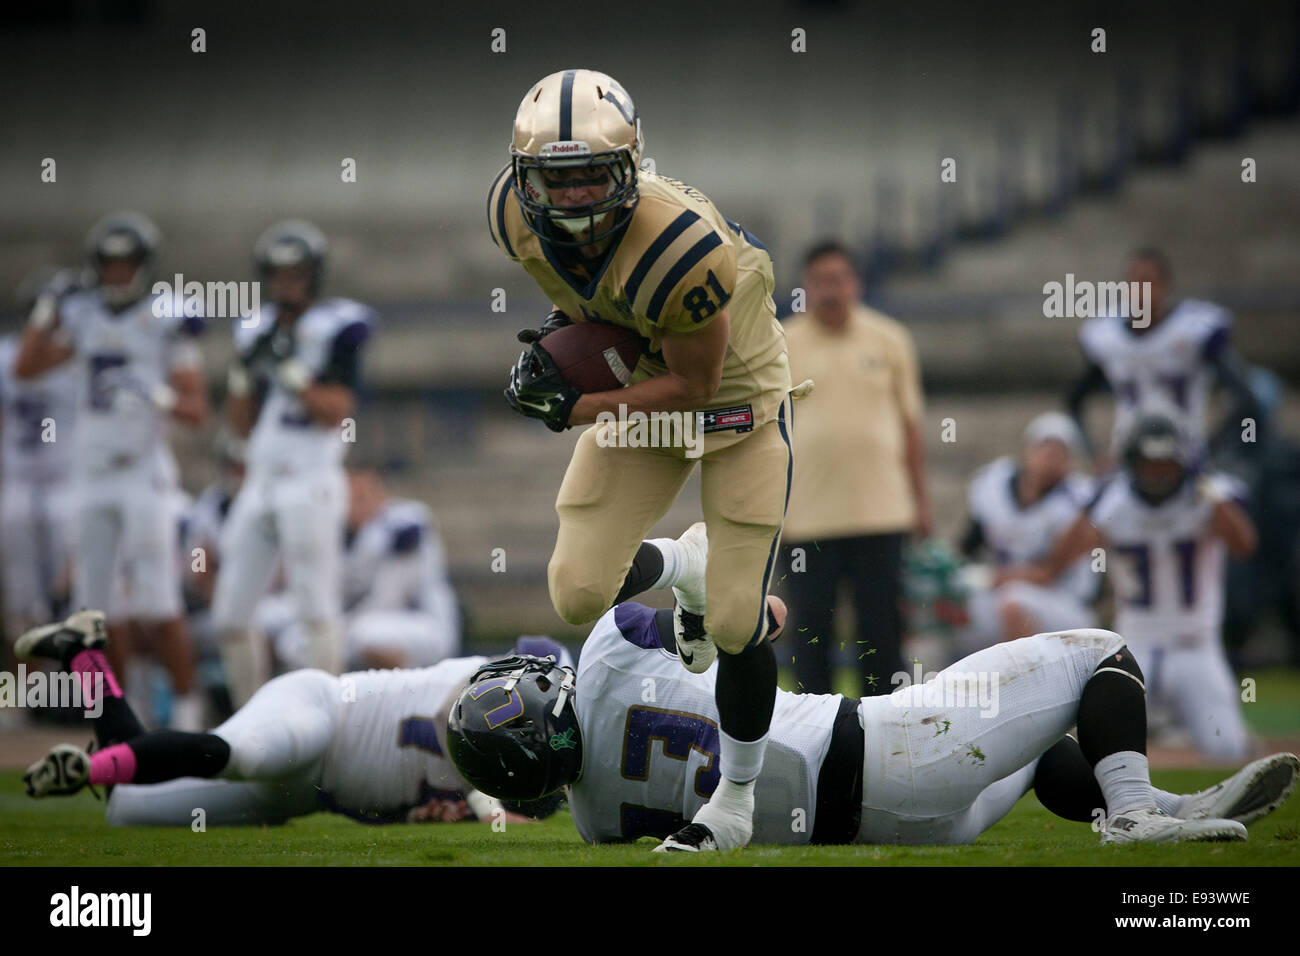 Mexico City, Mexico. 18th Oct, 2014. Players of Pumas C.U. of Mexico's National Autonomous University (UNAM) and Aguilas of Chihuahua's National Autonomous University (UACH) compete during the match of the week six of the 2014 Season of the Conference of the Eight Big of the National Student Football Association (ONEFA, for its acronym in Spanish), in the University Olympic Stadium, in Mexico City, capital of Mexico, on Oct. 18, 2014. © Pedro Mera/Xinhua/Alamy Live News Stock Photo